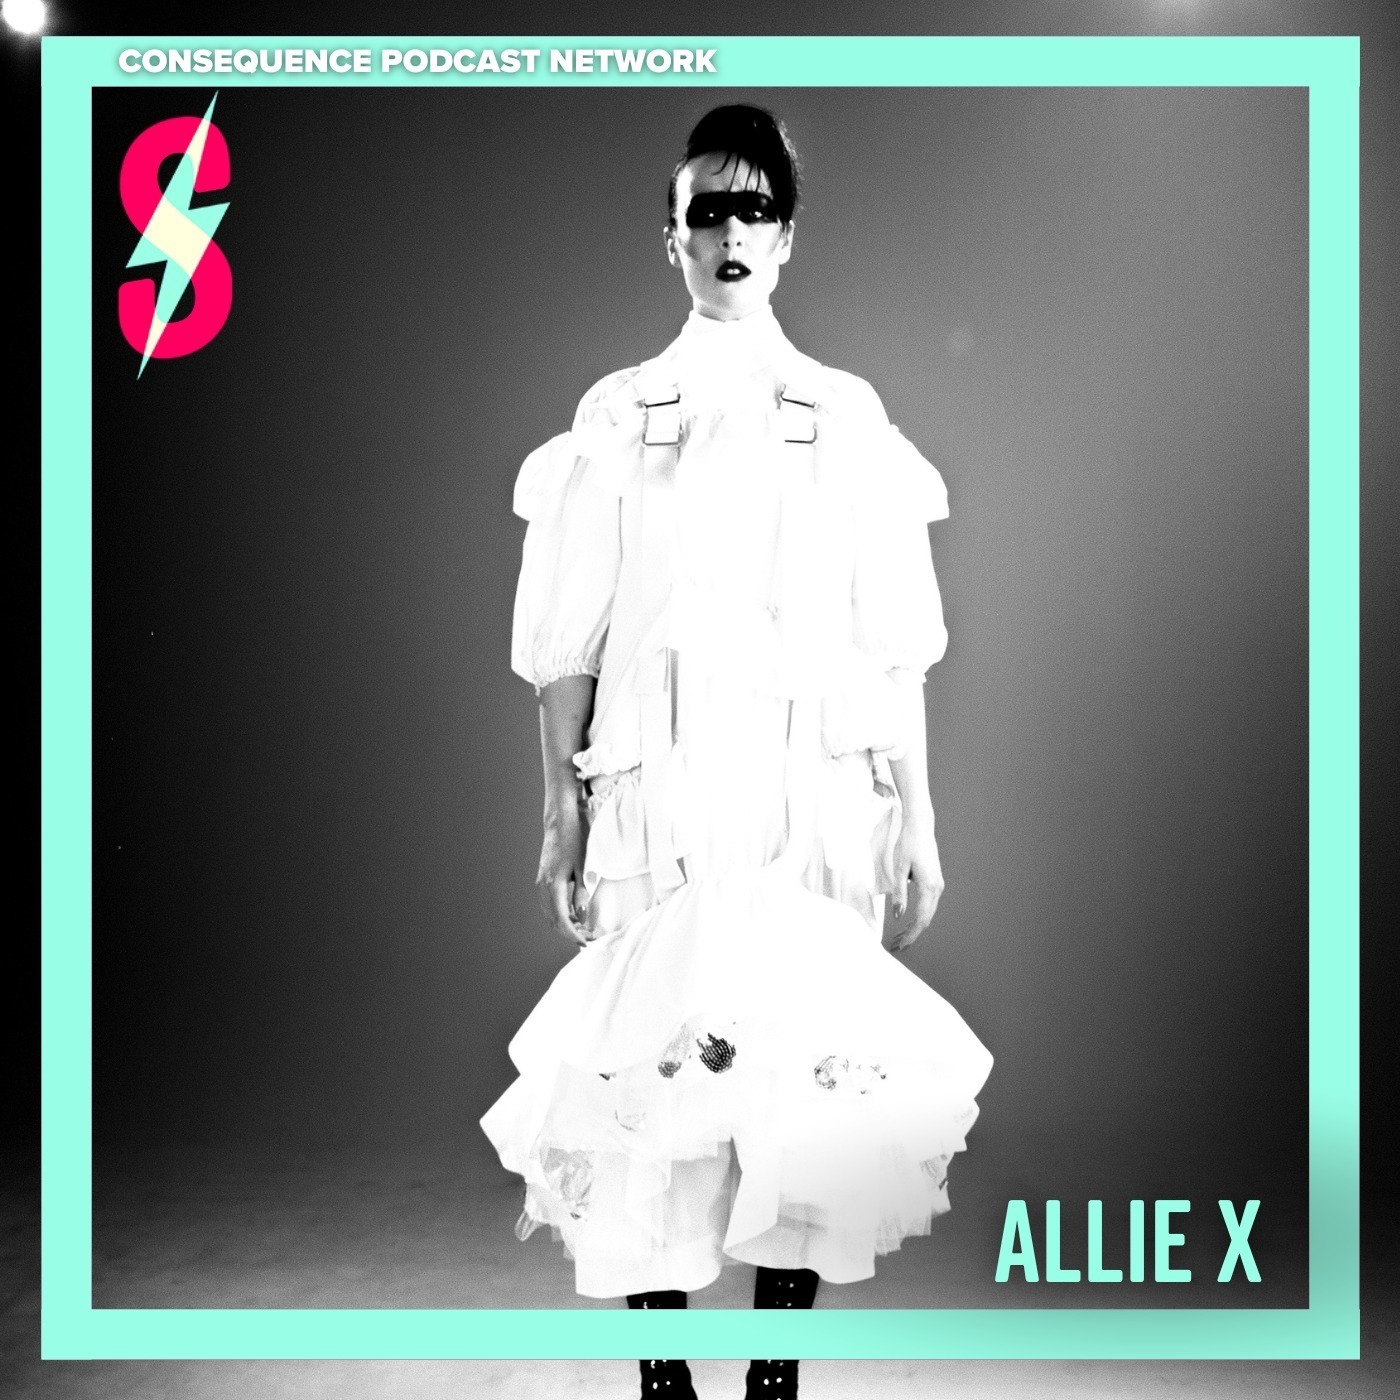 Allie X's Spark Is Waiting For Guffman